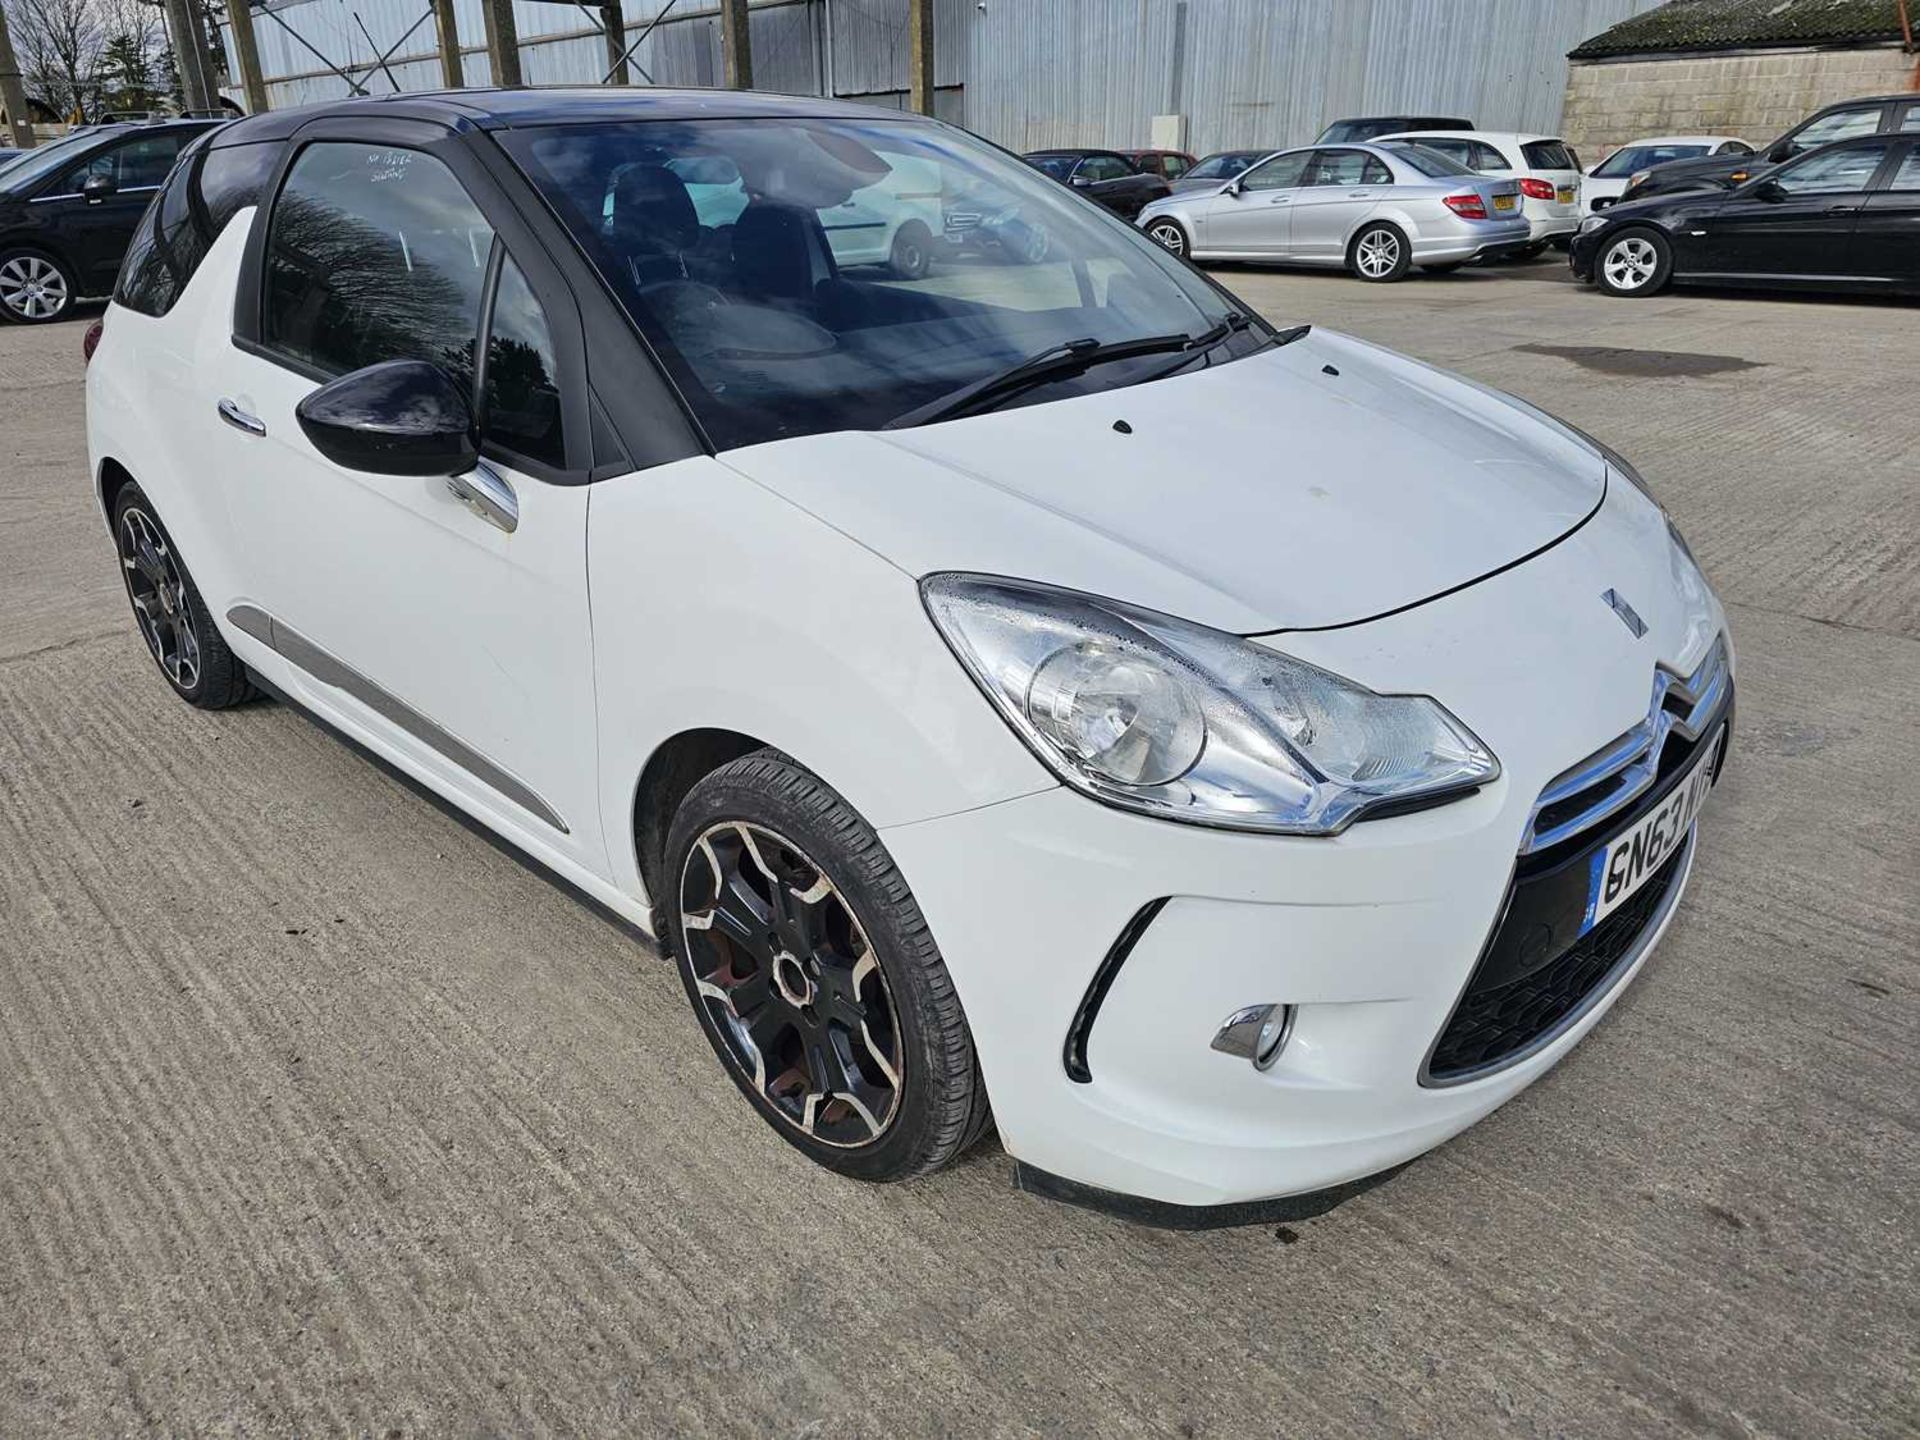 2013 Citroen DS3, 5 Speed, A/C (Reg. Docs. Available) - Image 8 of 29